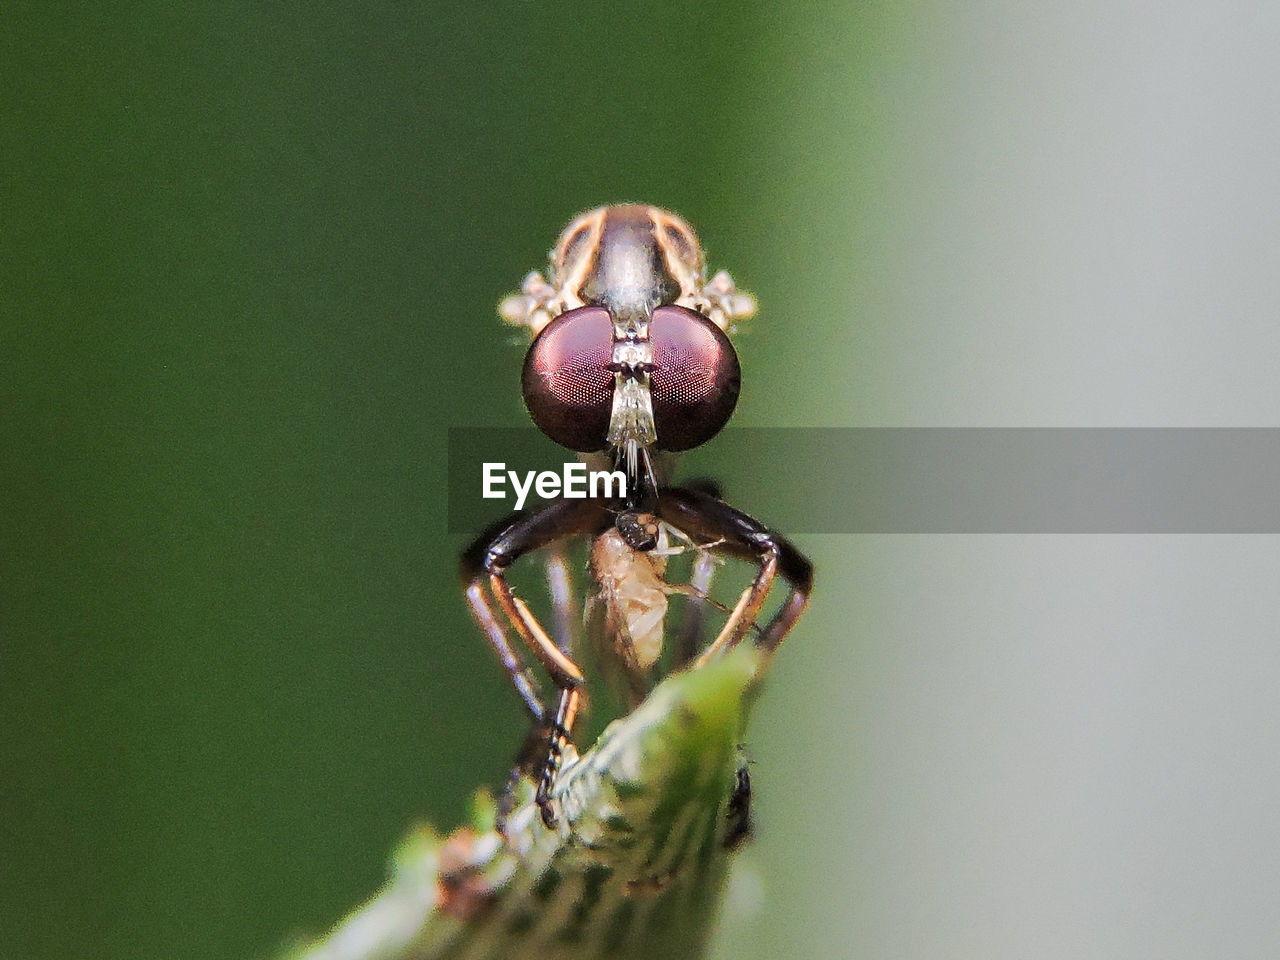 Detail shot of insect on stem against blurred background